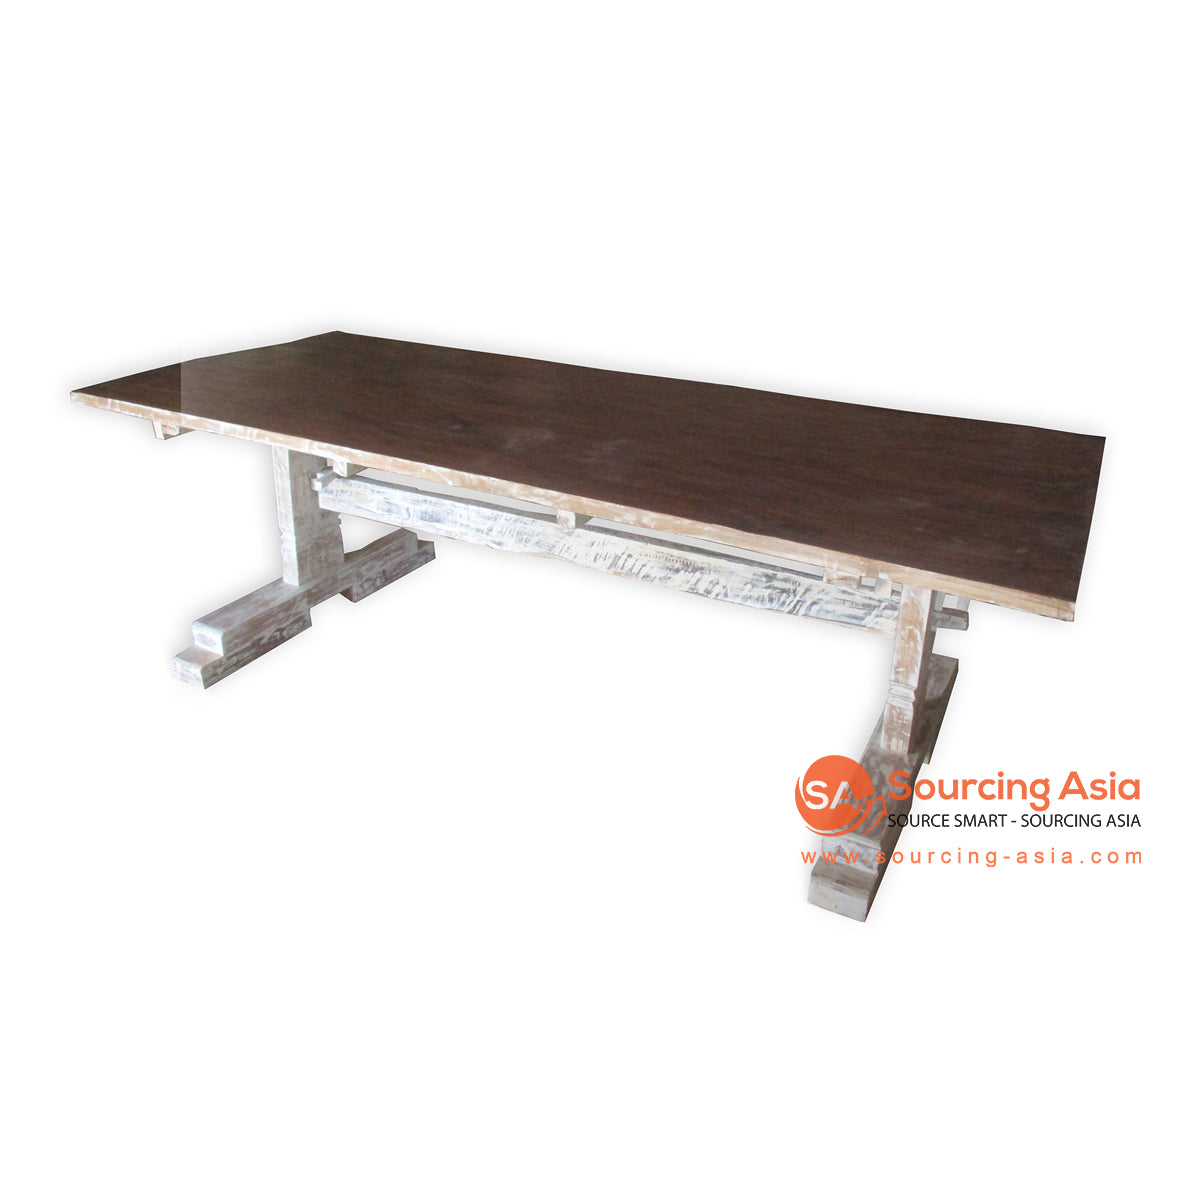 THE139 NATURAL AND WHITE WASH TEAK WOOD DINING TABLE